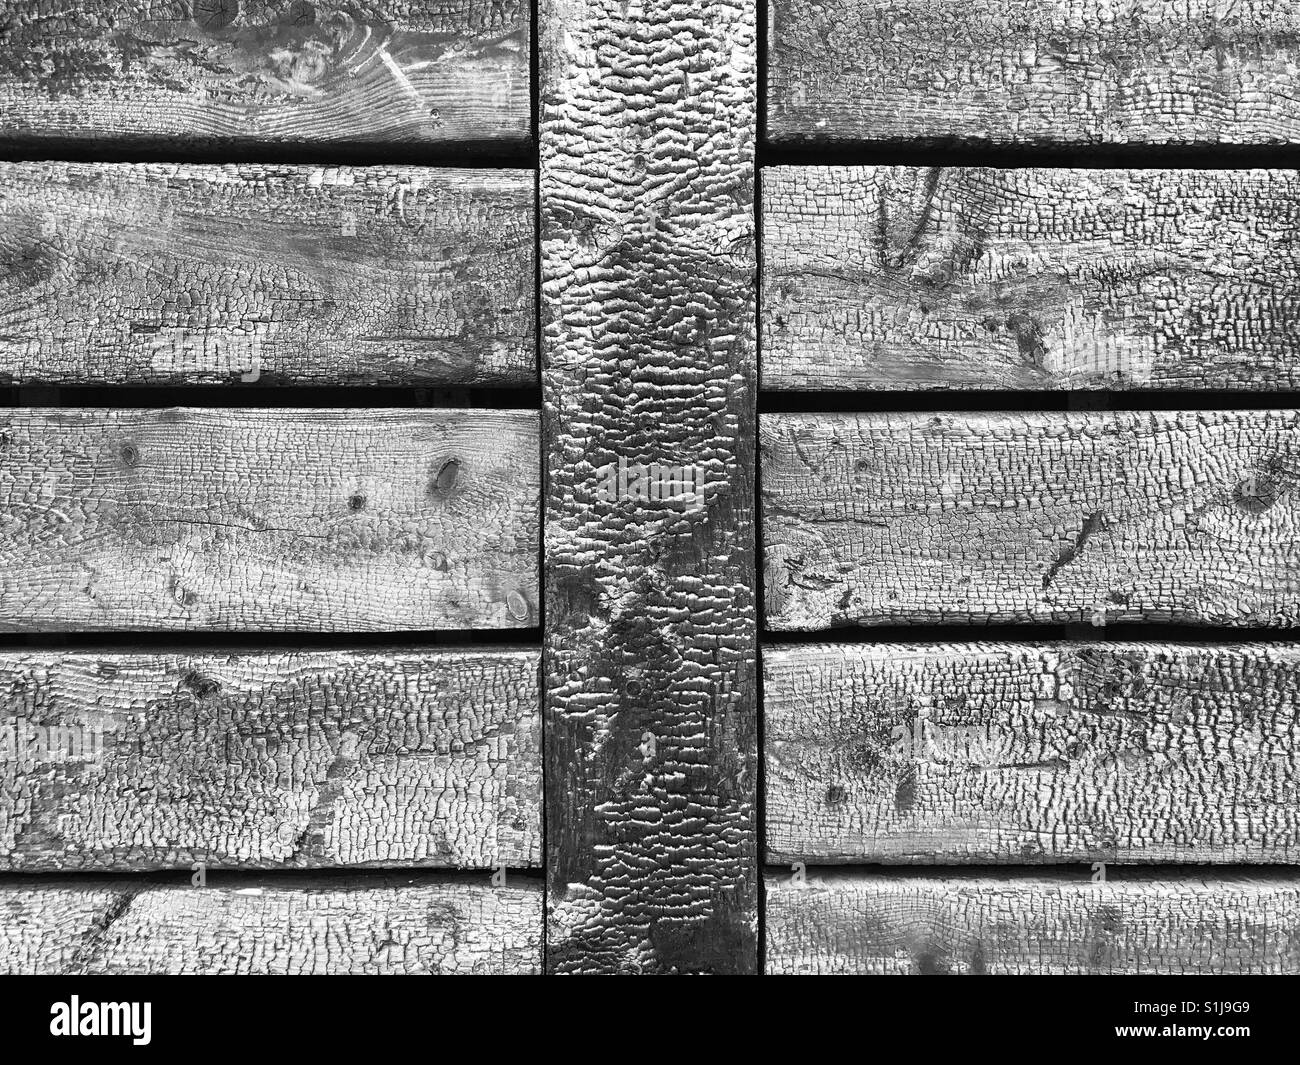 Charred wooden cladding on the exterior of a building on the Isle of Mull, Scotland. Stock Photo